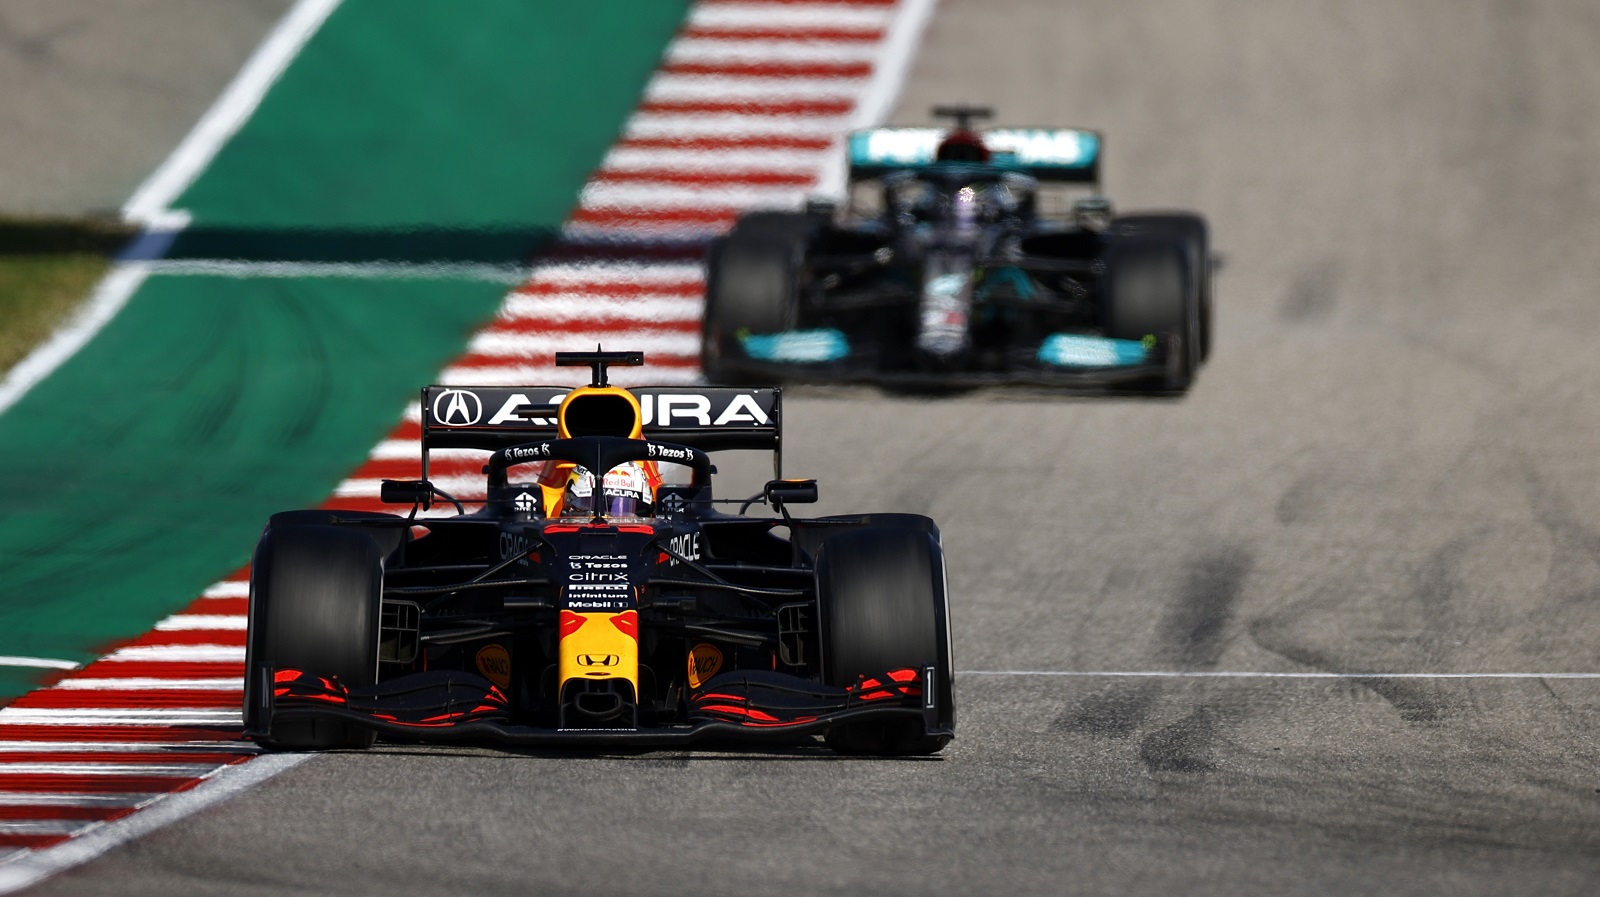 Max Verstappen leads Lewis Hamilton during the Formula 1 U.S. Grand Prix at Circuit of the Americas on Oct. 24, 2021 in Austin, Texas.